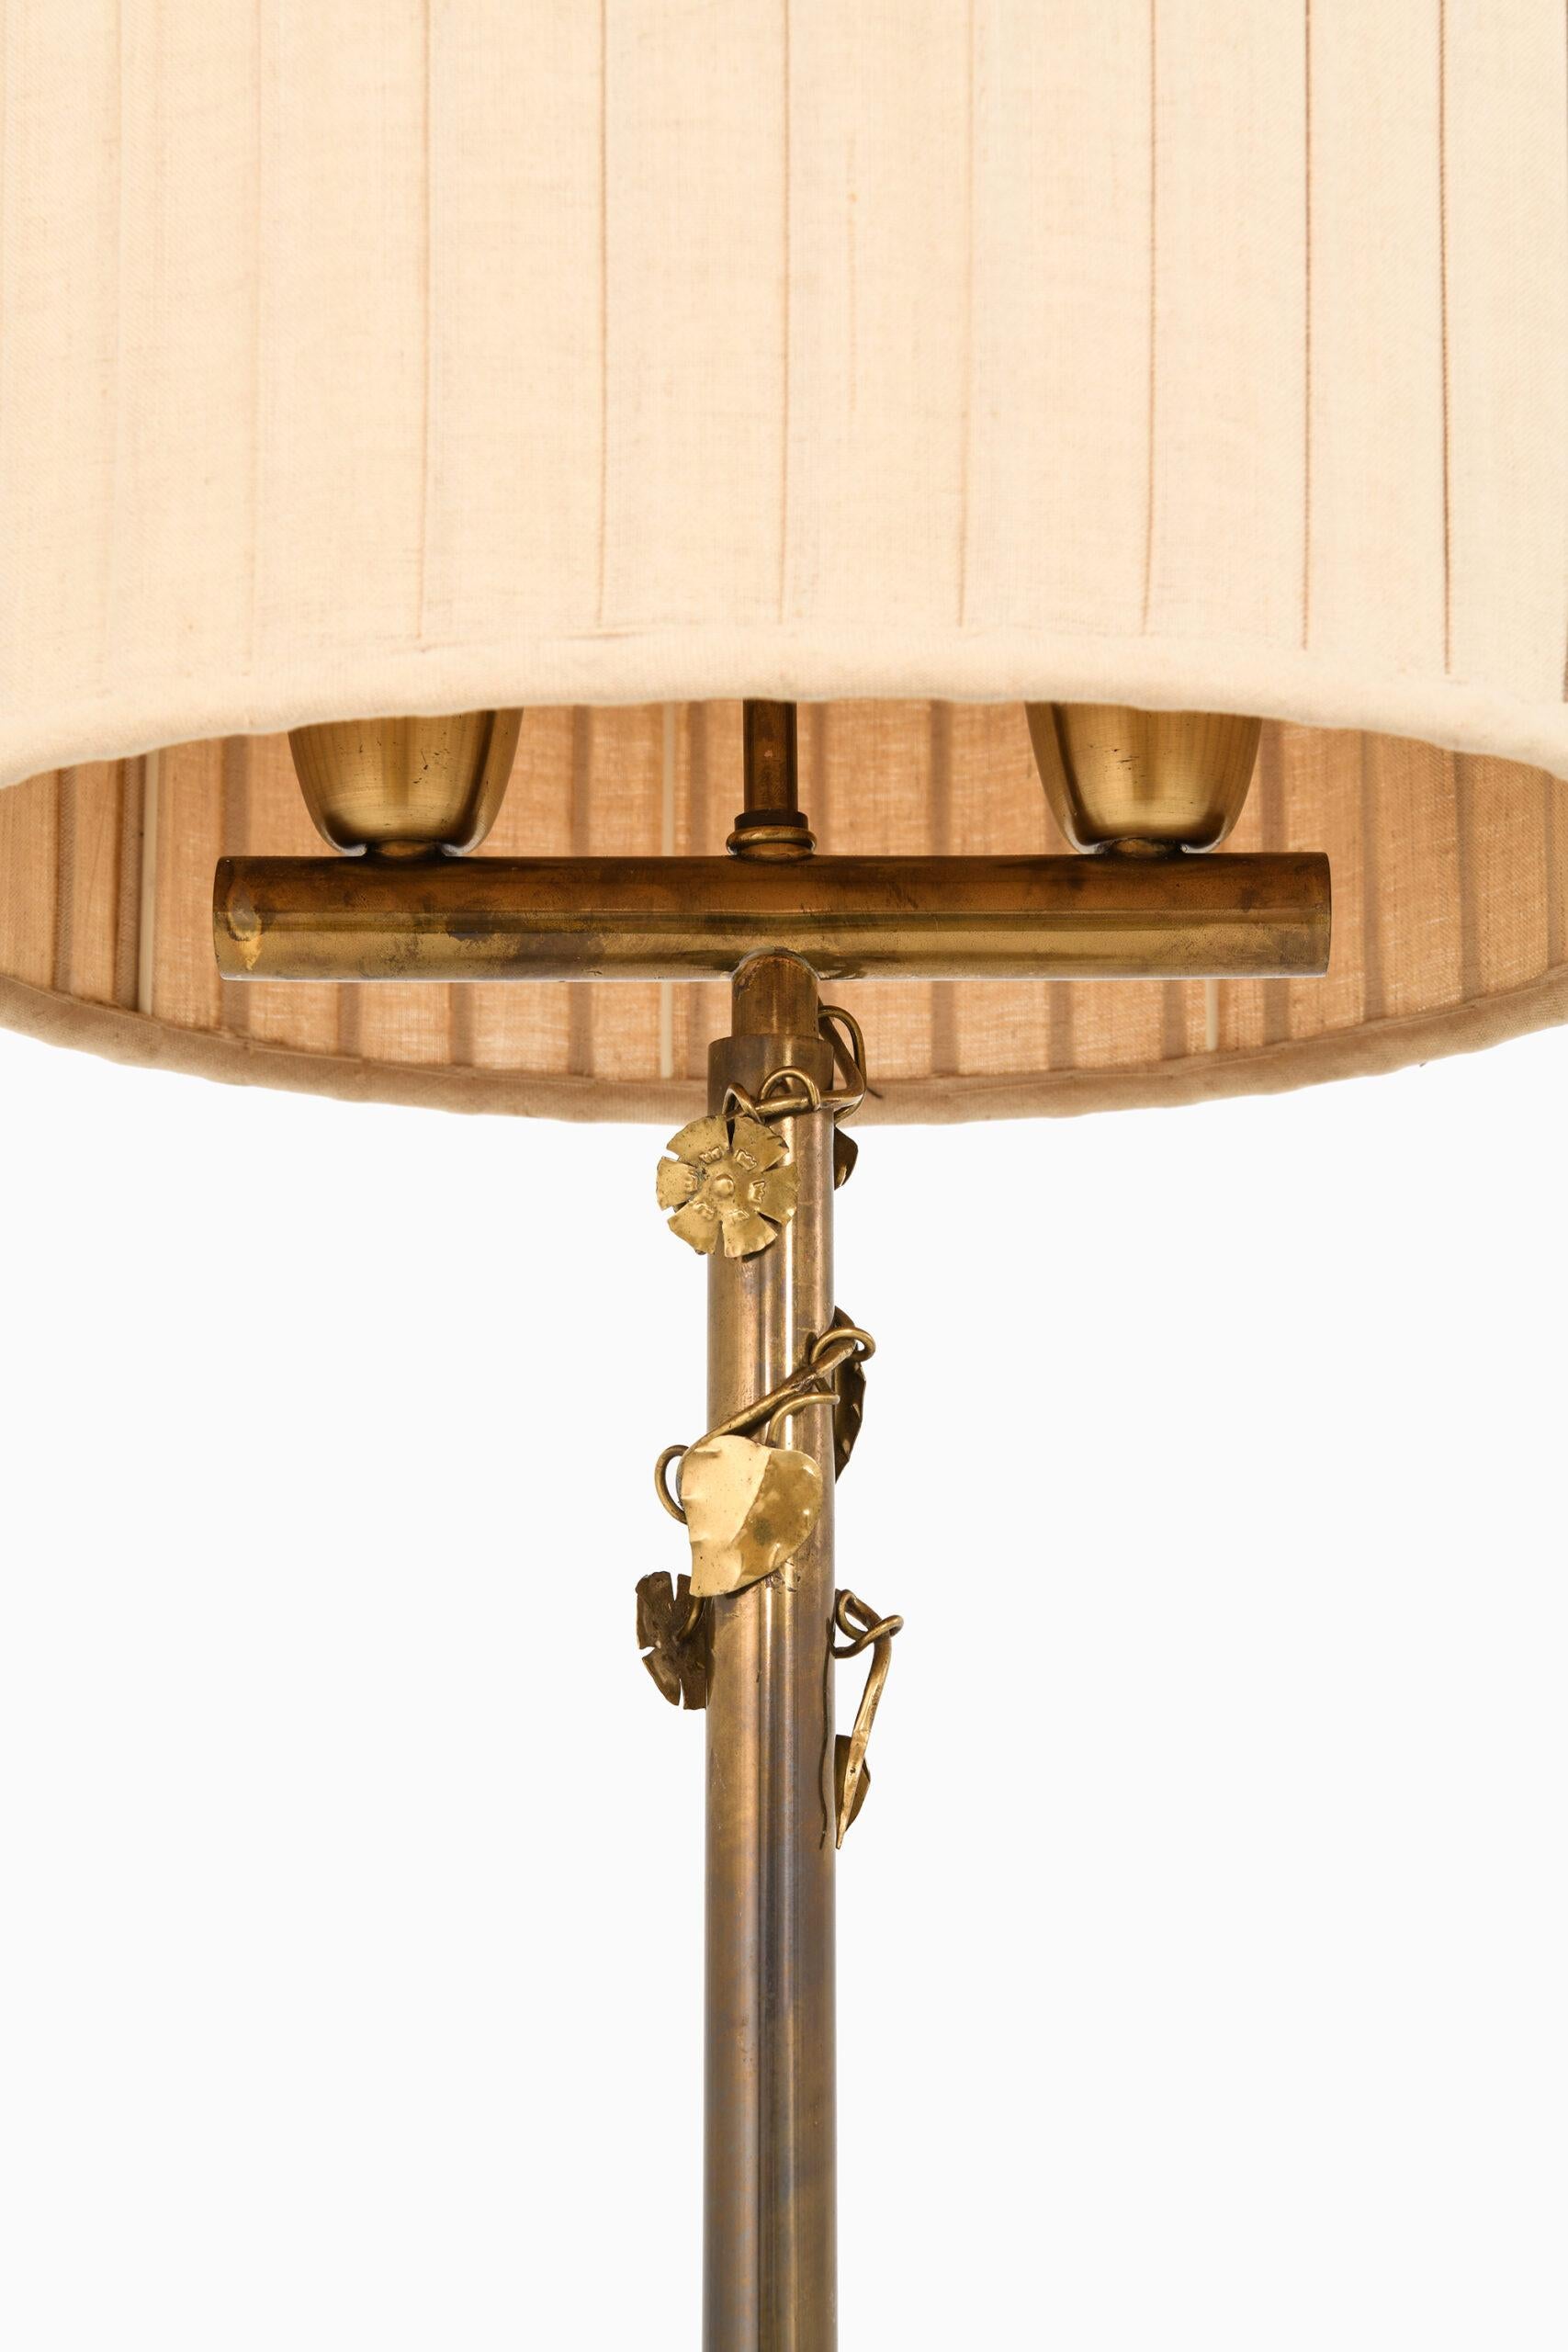 Rare table lamp by unknown designer. Produced in Sweden.